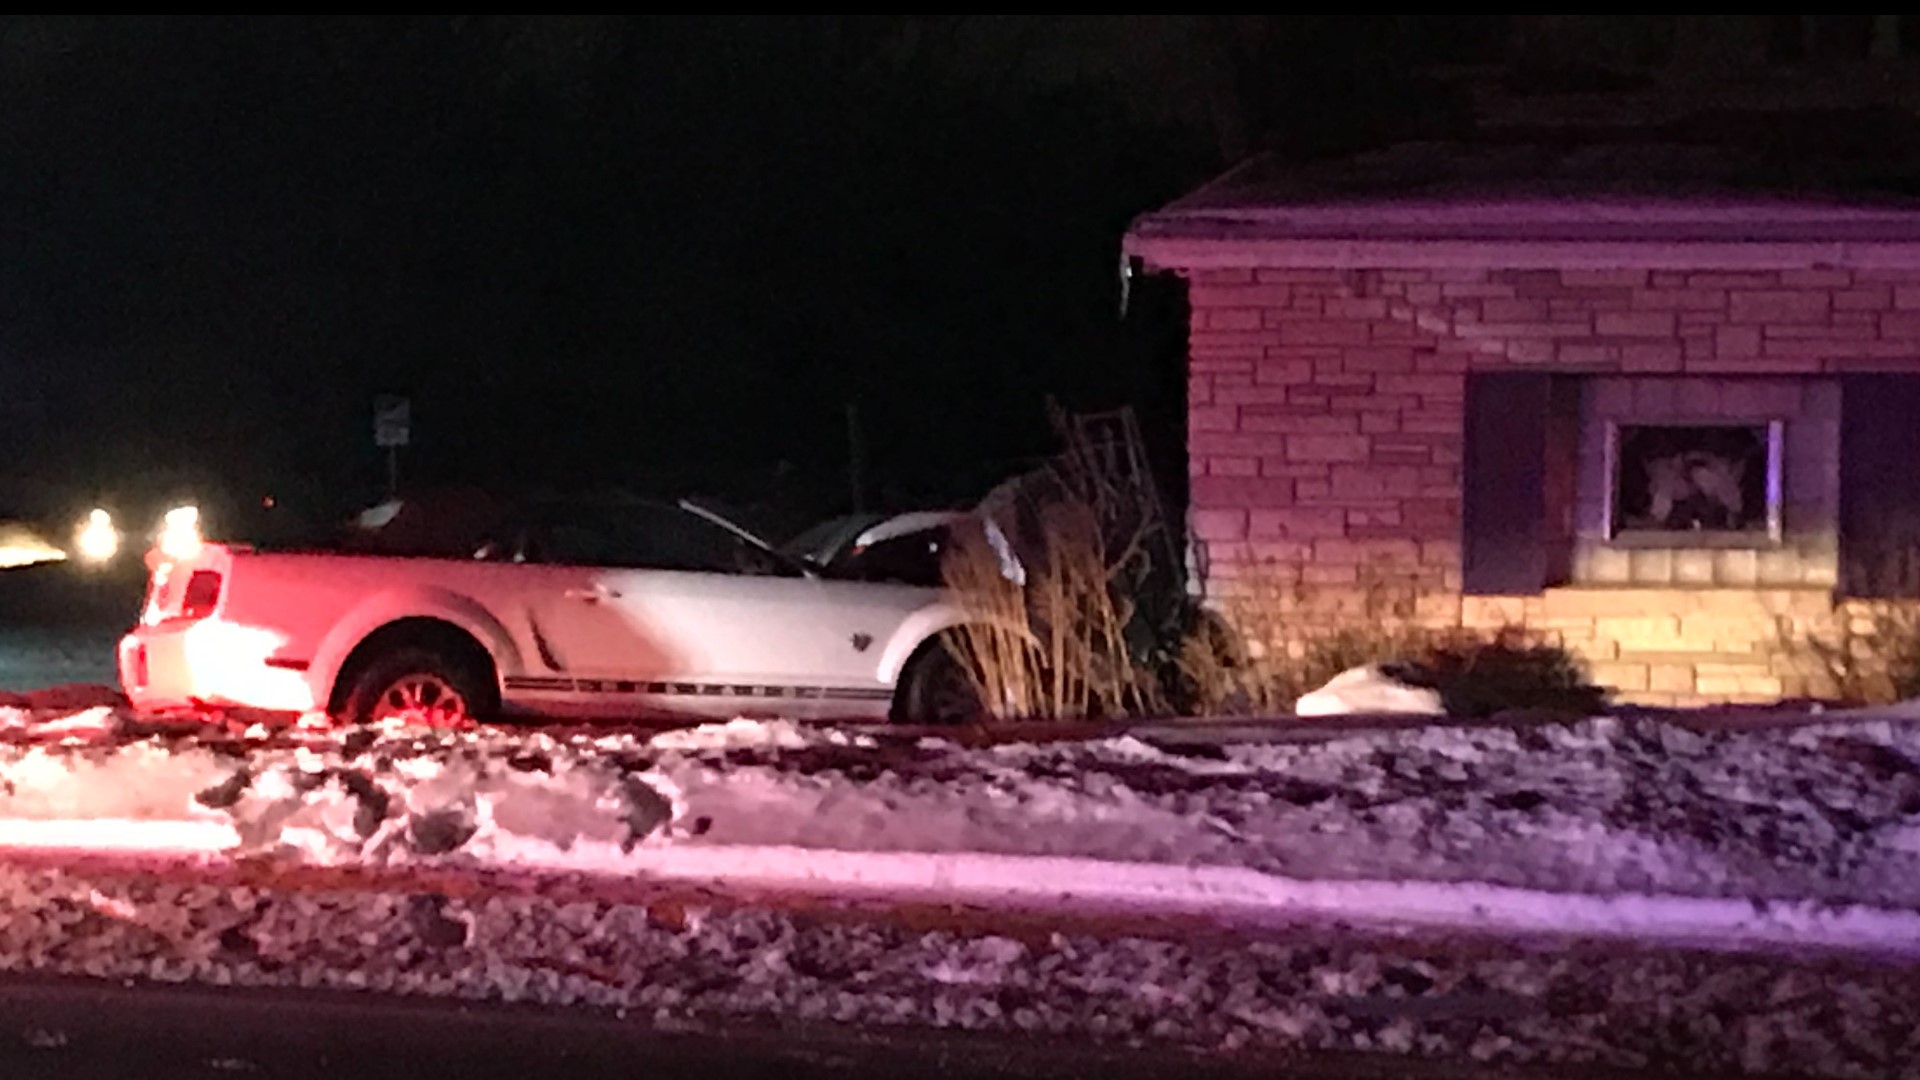 Overnight a vehicle hit a power pole before crashing into a gift shop, causing a power outage in Crystal, Minnesota on Monday morning.